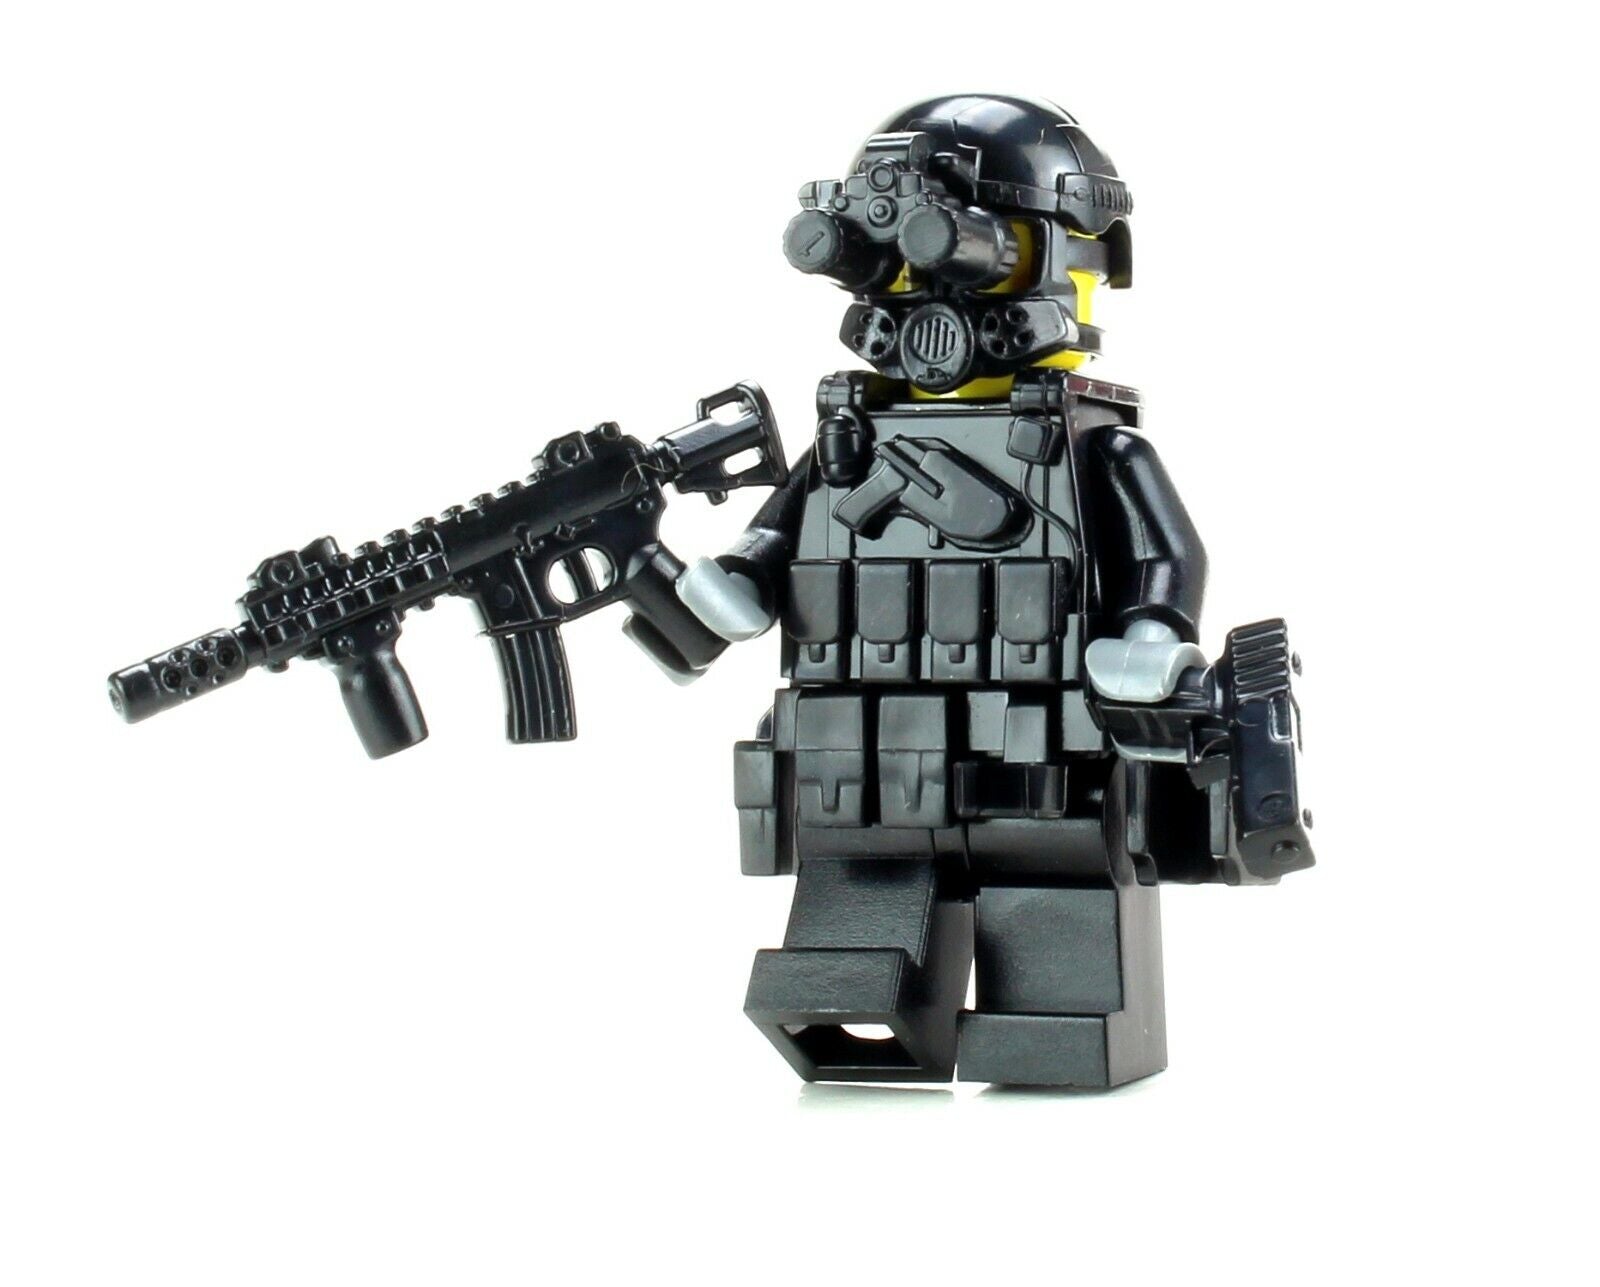 SWAT Police Officer Assaulter - Custom Military Minifigure made w/ LEGO Parts